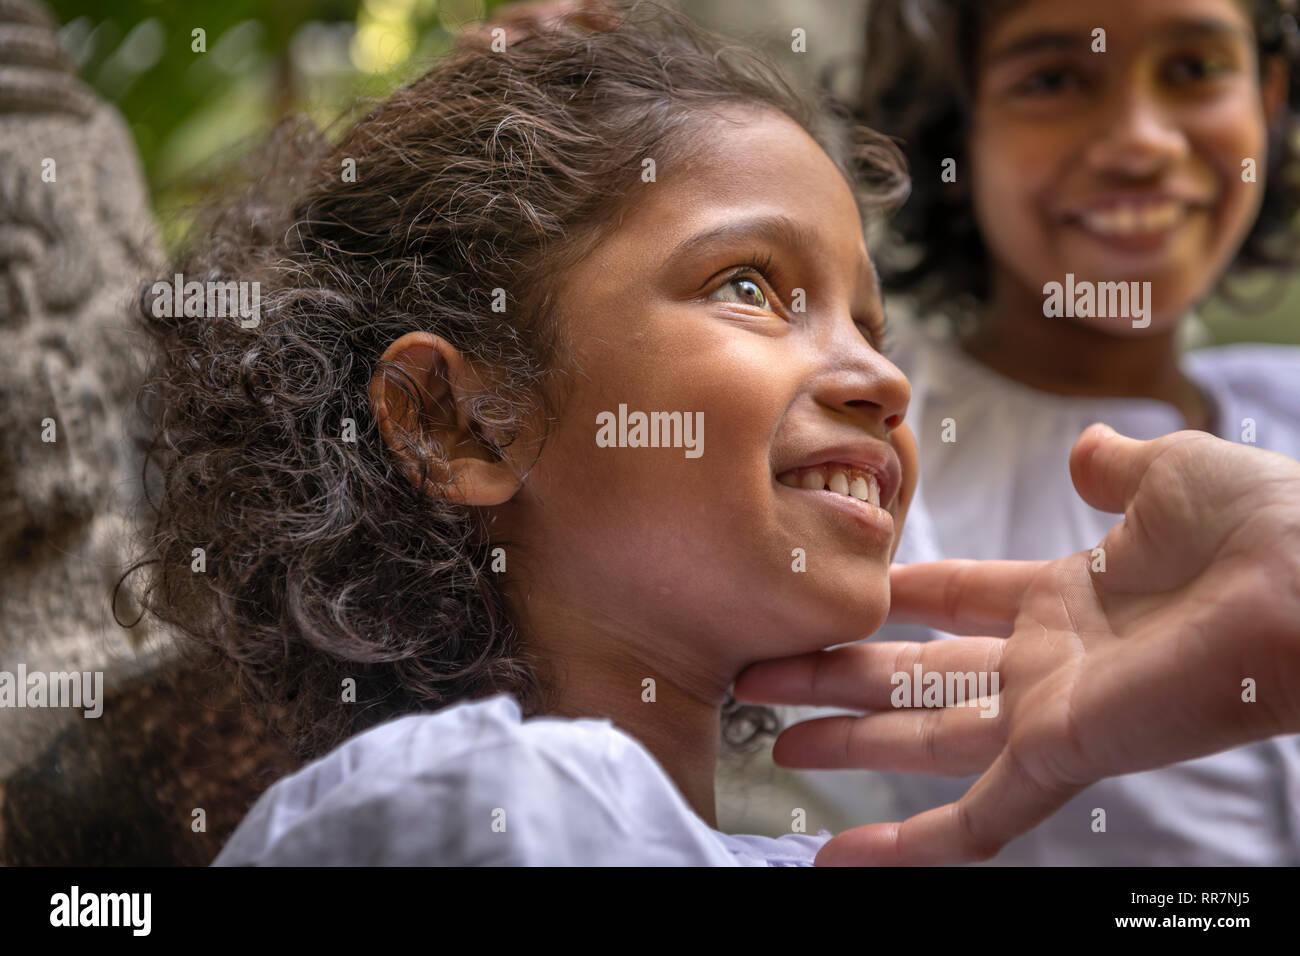 A little girl takes time out from Sunday School at the Gangaramaya Buddhist Temple in Colombo Sri Lanka. Stock Photo